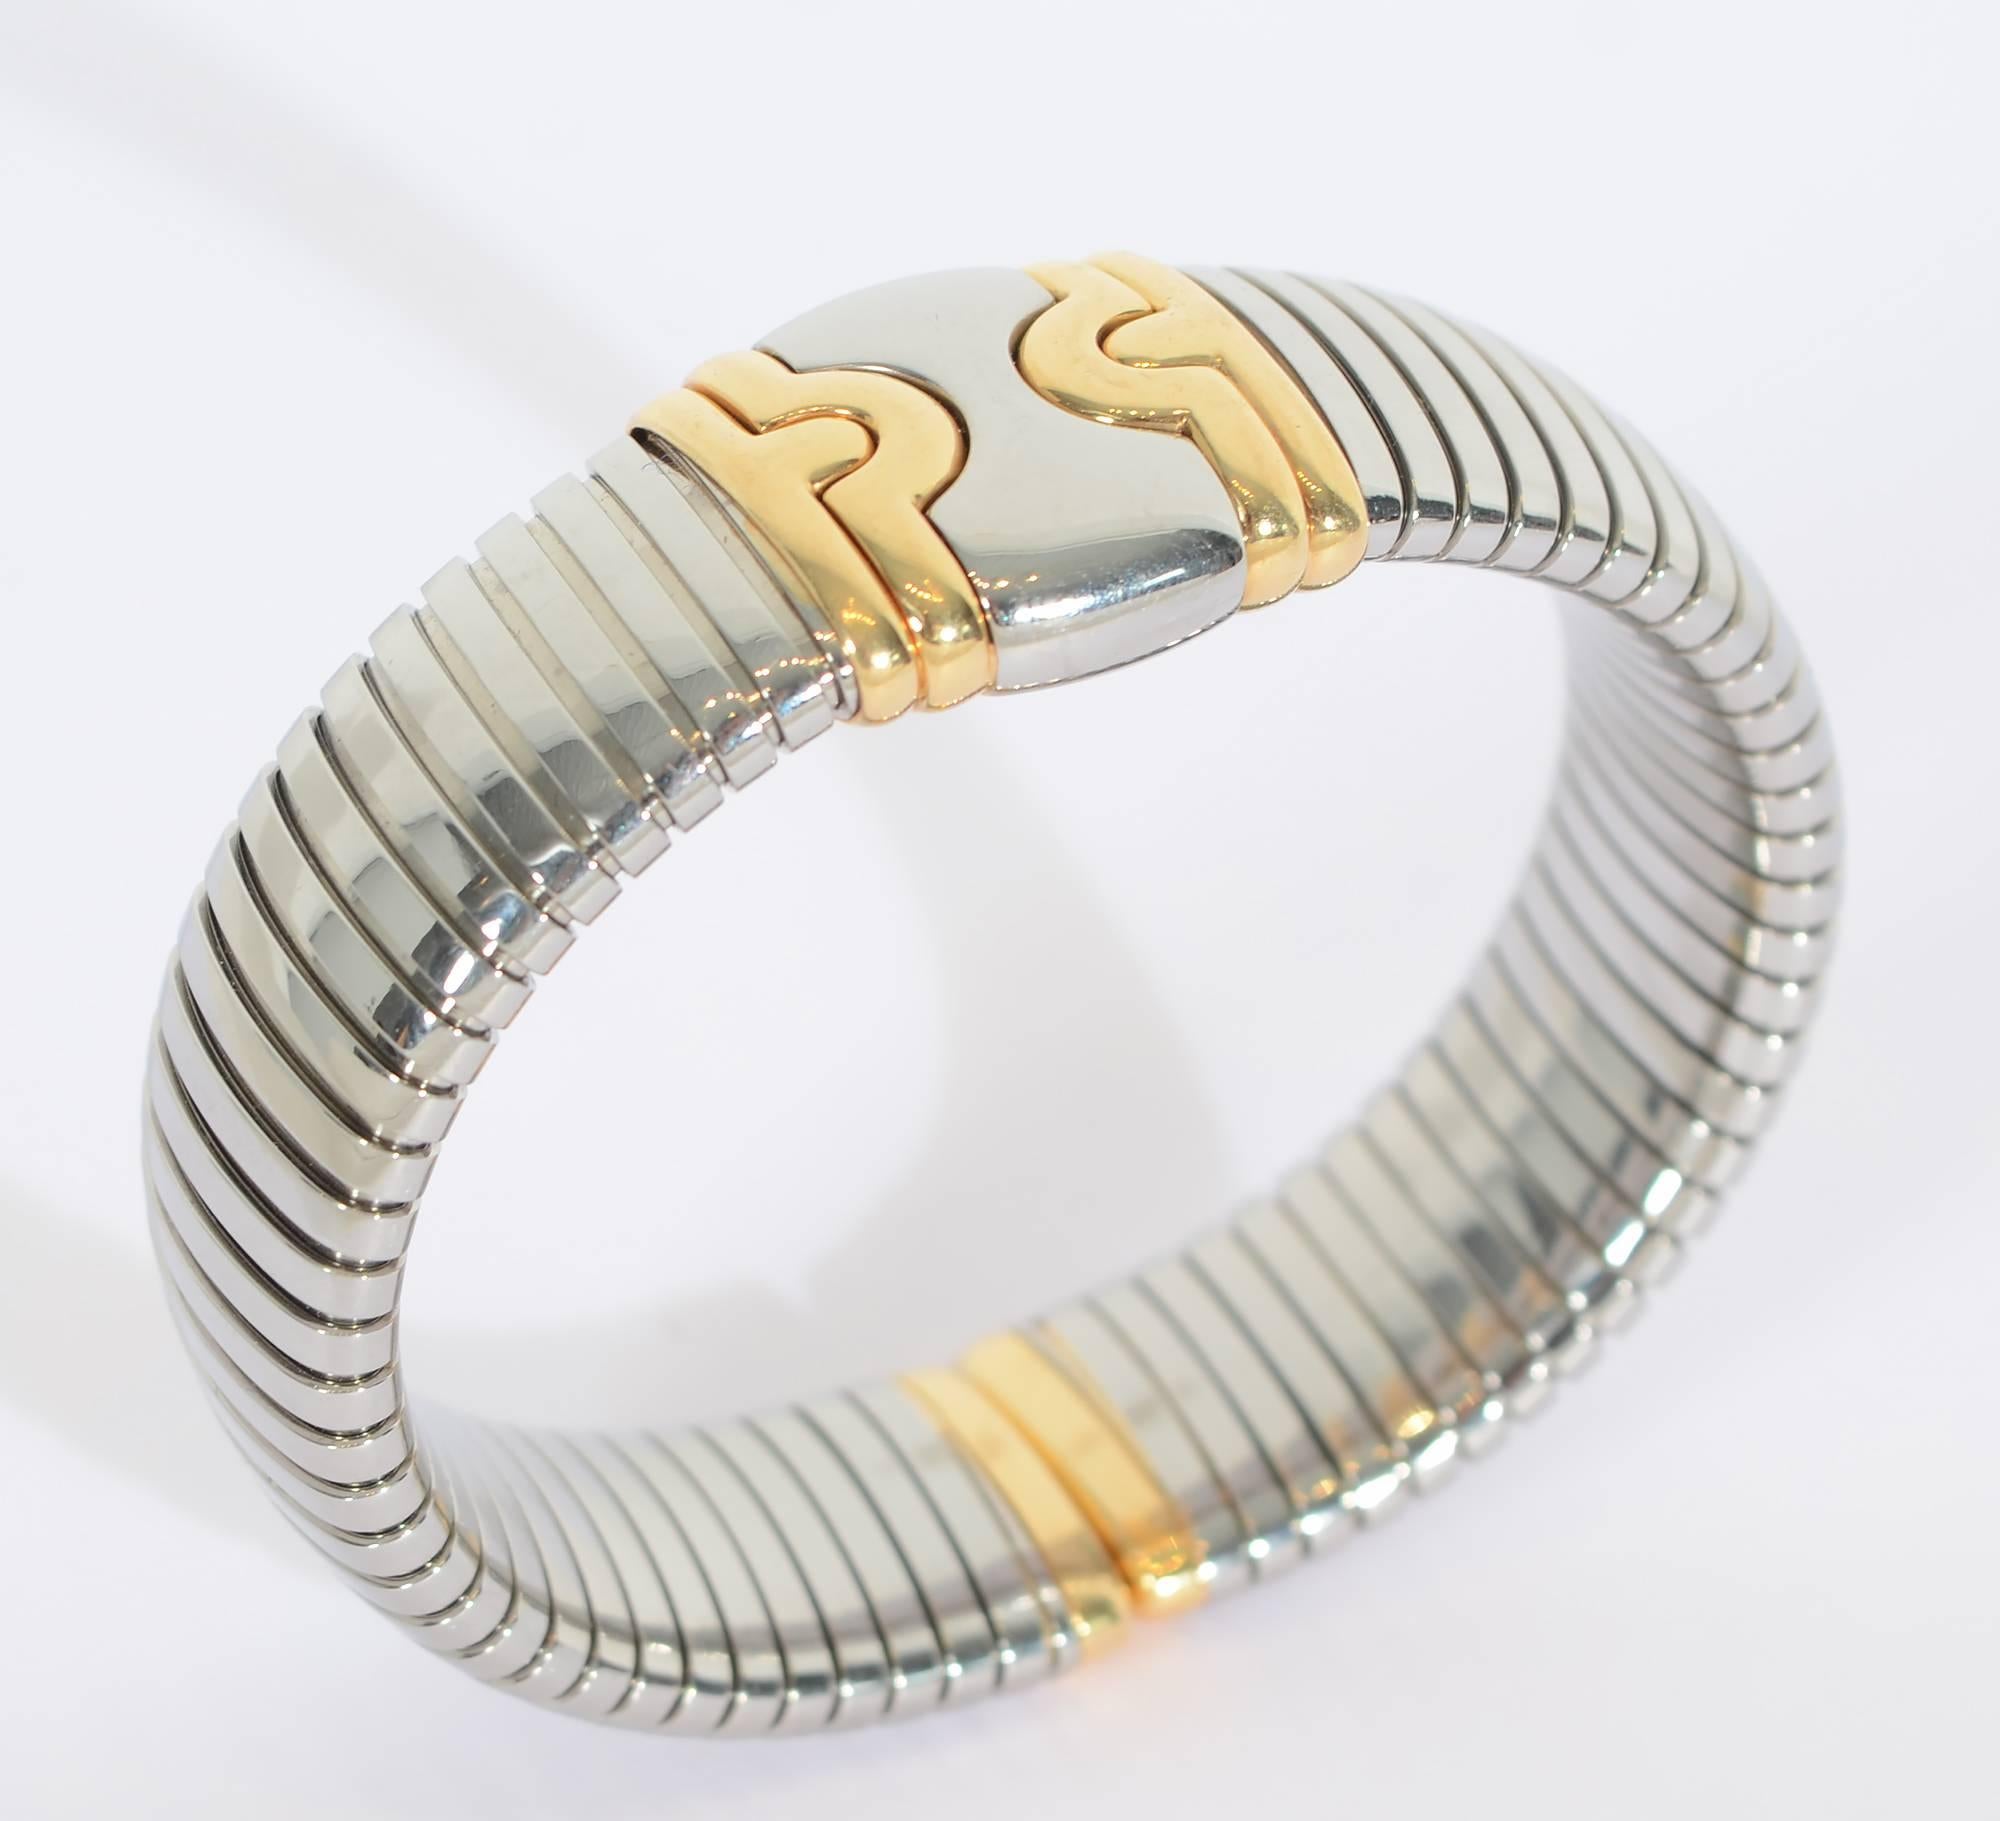 Classic Bulgari tubogas cuff bracelet made of steel with 18 karat gold front medallion and tips. The bracelet is 8  3/8